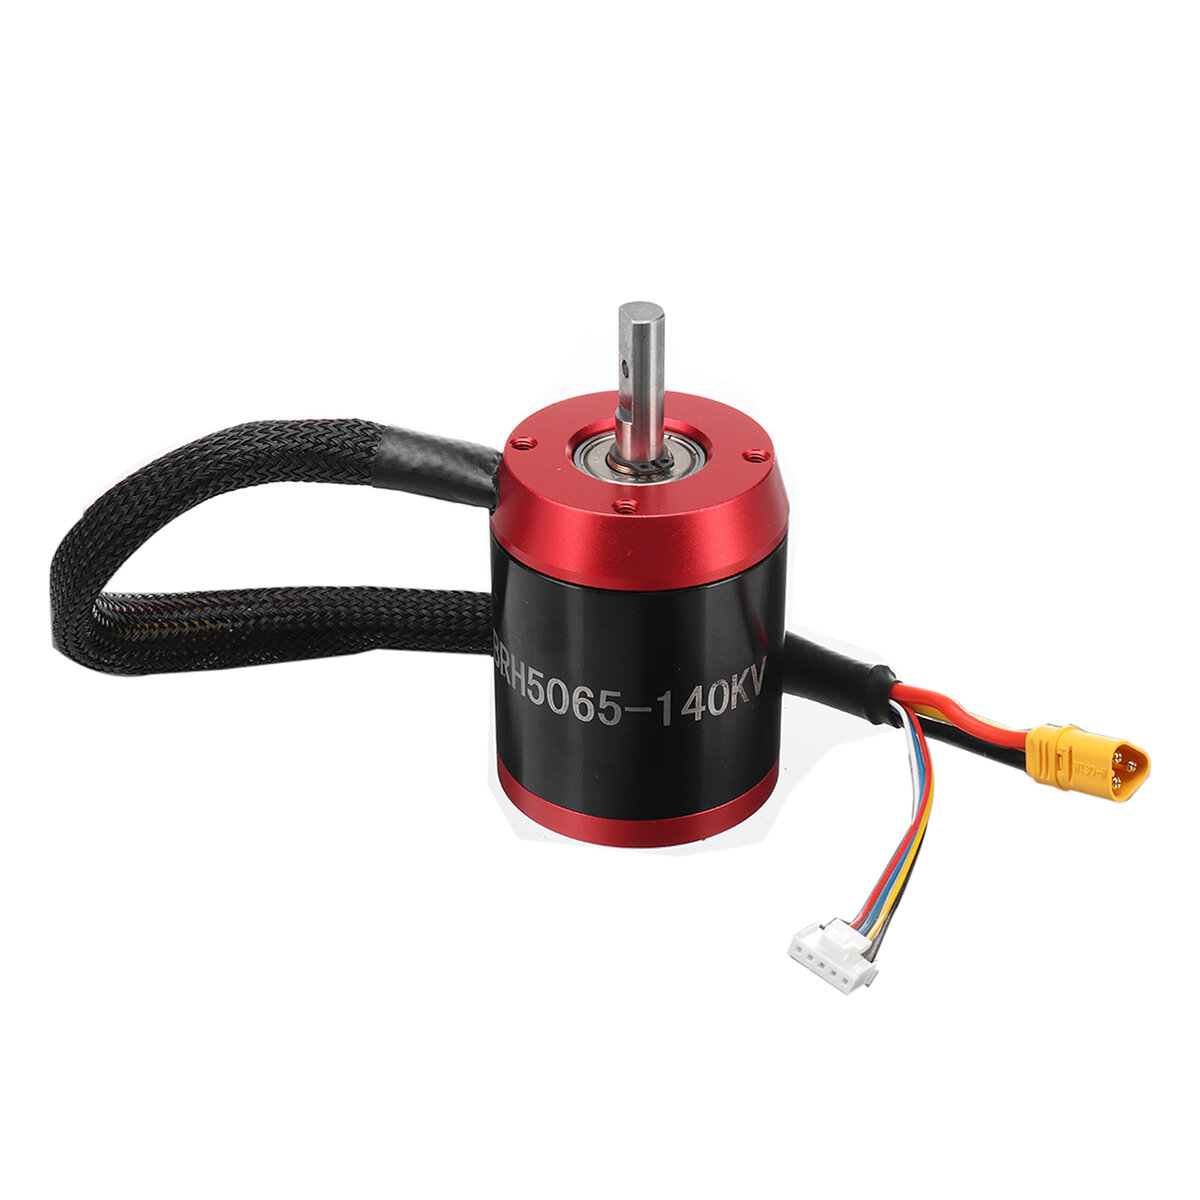 

Racerstar 5065 BRH5065 140KV 6-12S Brushless Motor Without Gear For Balancing Scooter